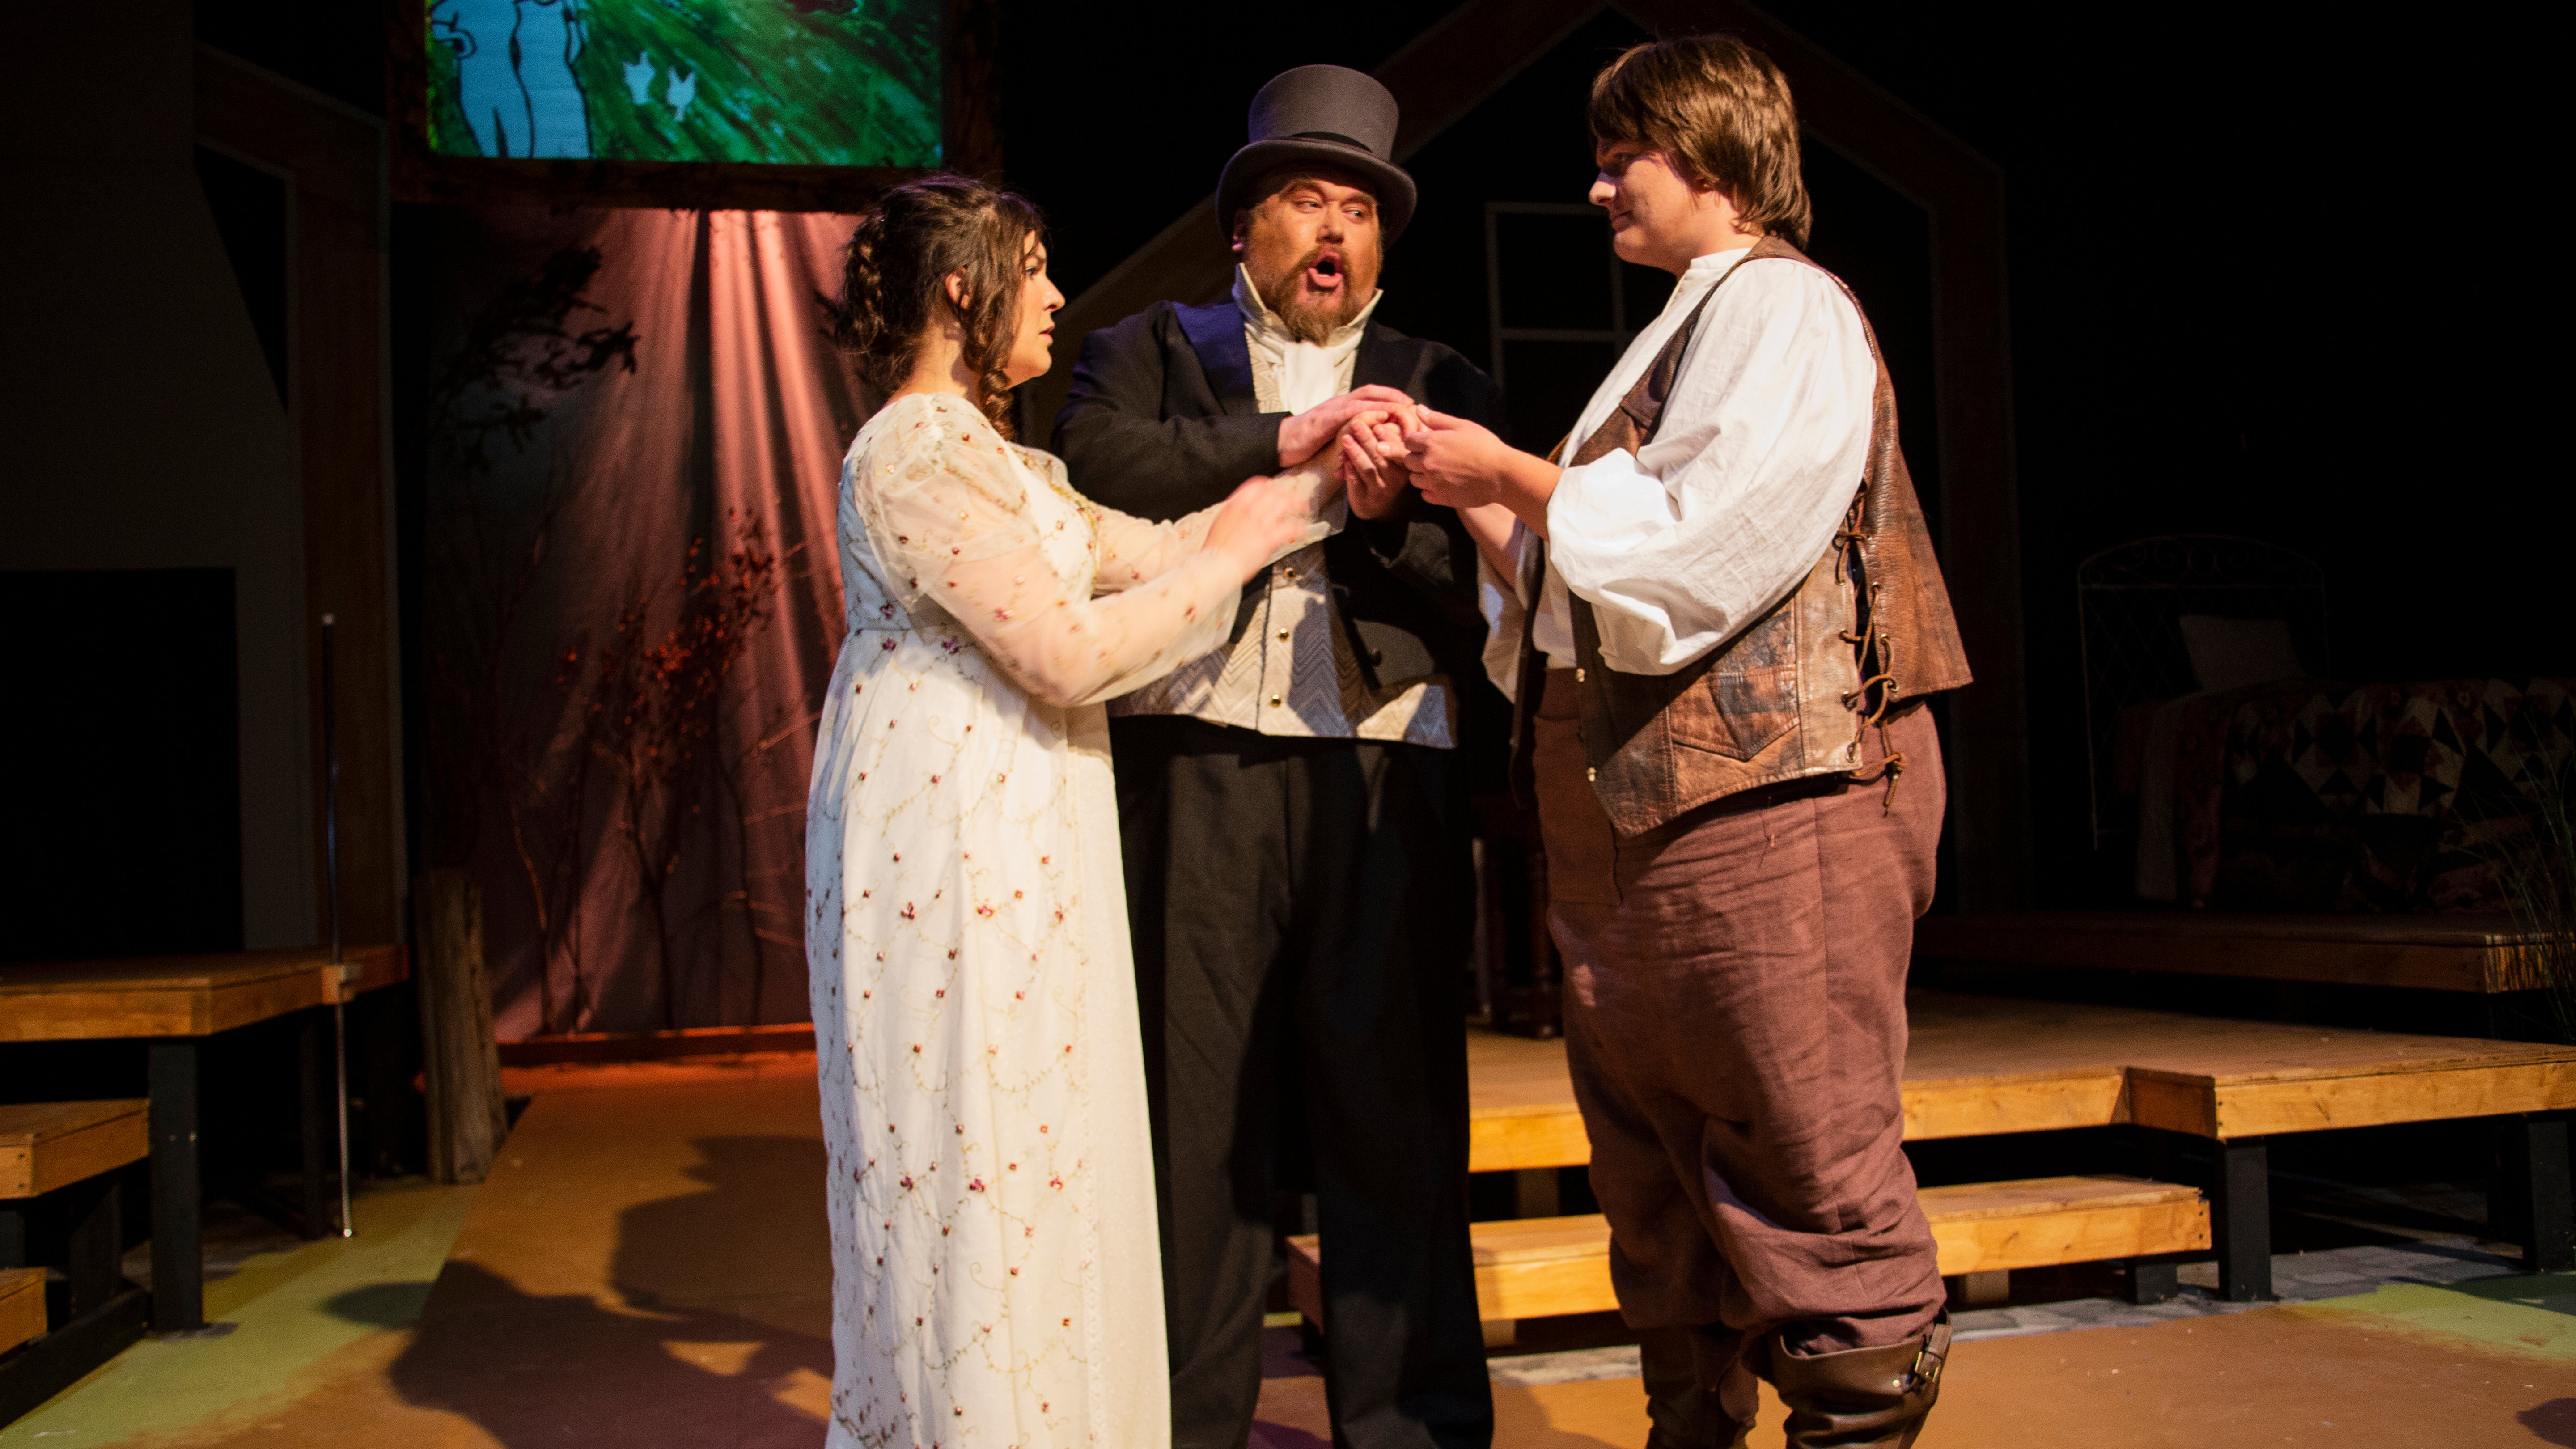 Patience, (Angela Born), Sarah, (Jenna Schroer) and Edward (Dennis Kalup) in Third Eye Theatre Ensemble's production of Patience and Sarah. (Photo: Clint Funk)